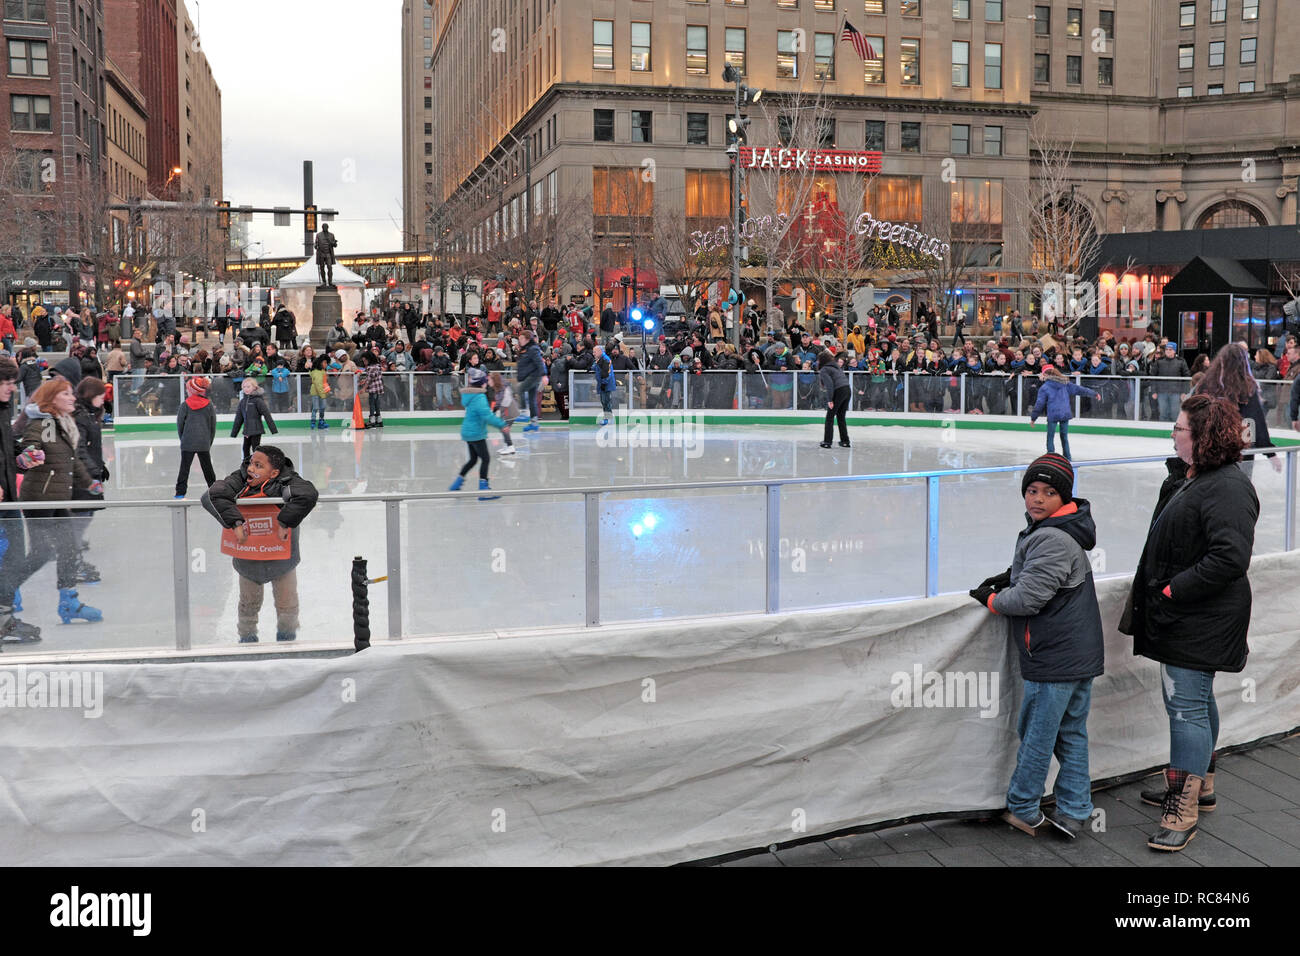 Ice skaters enjoy the seasonal outdoor ice skating rink in Public Square in downtown Cleveland, Ohio, USA. Stock Photo